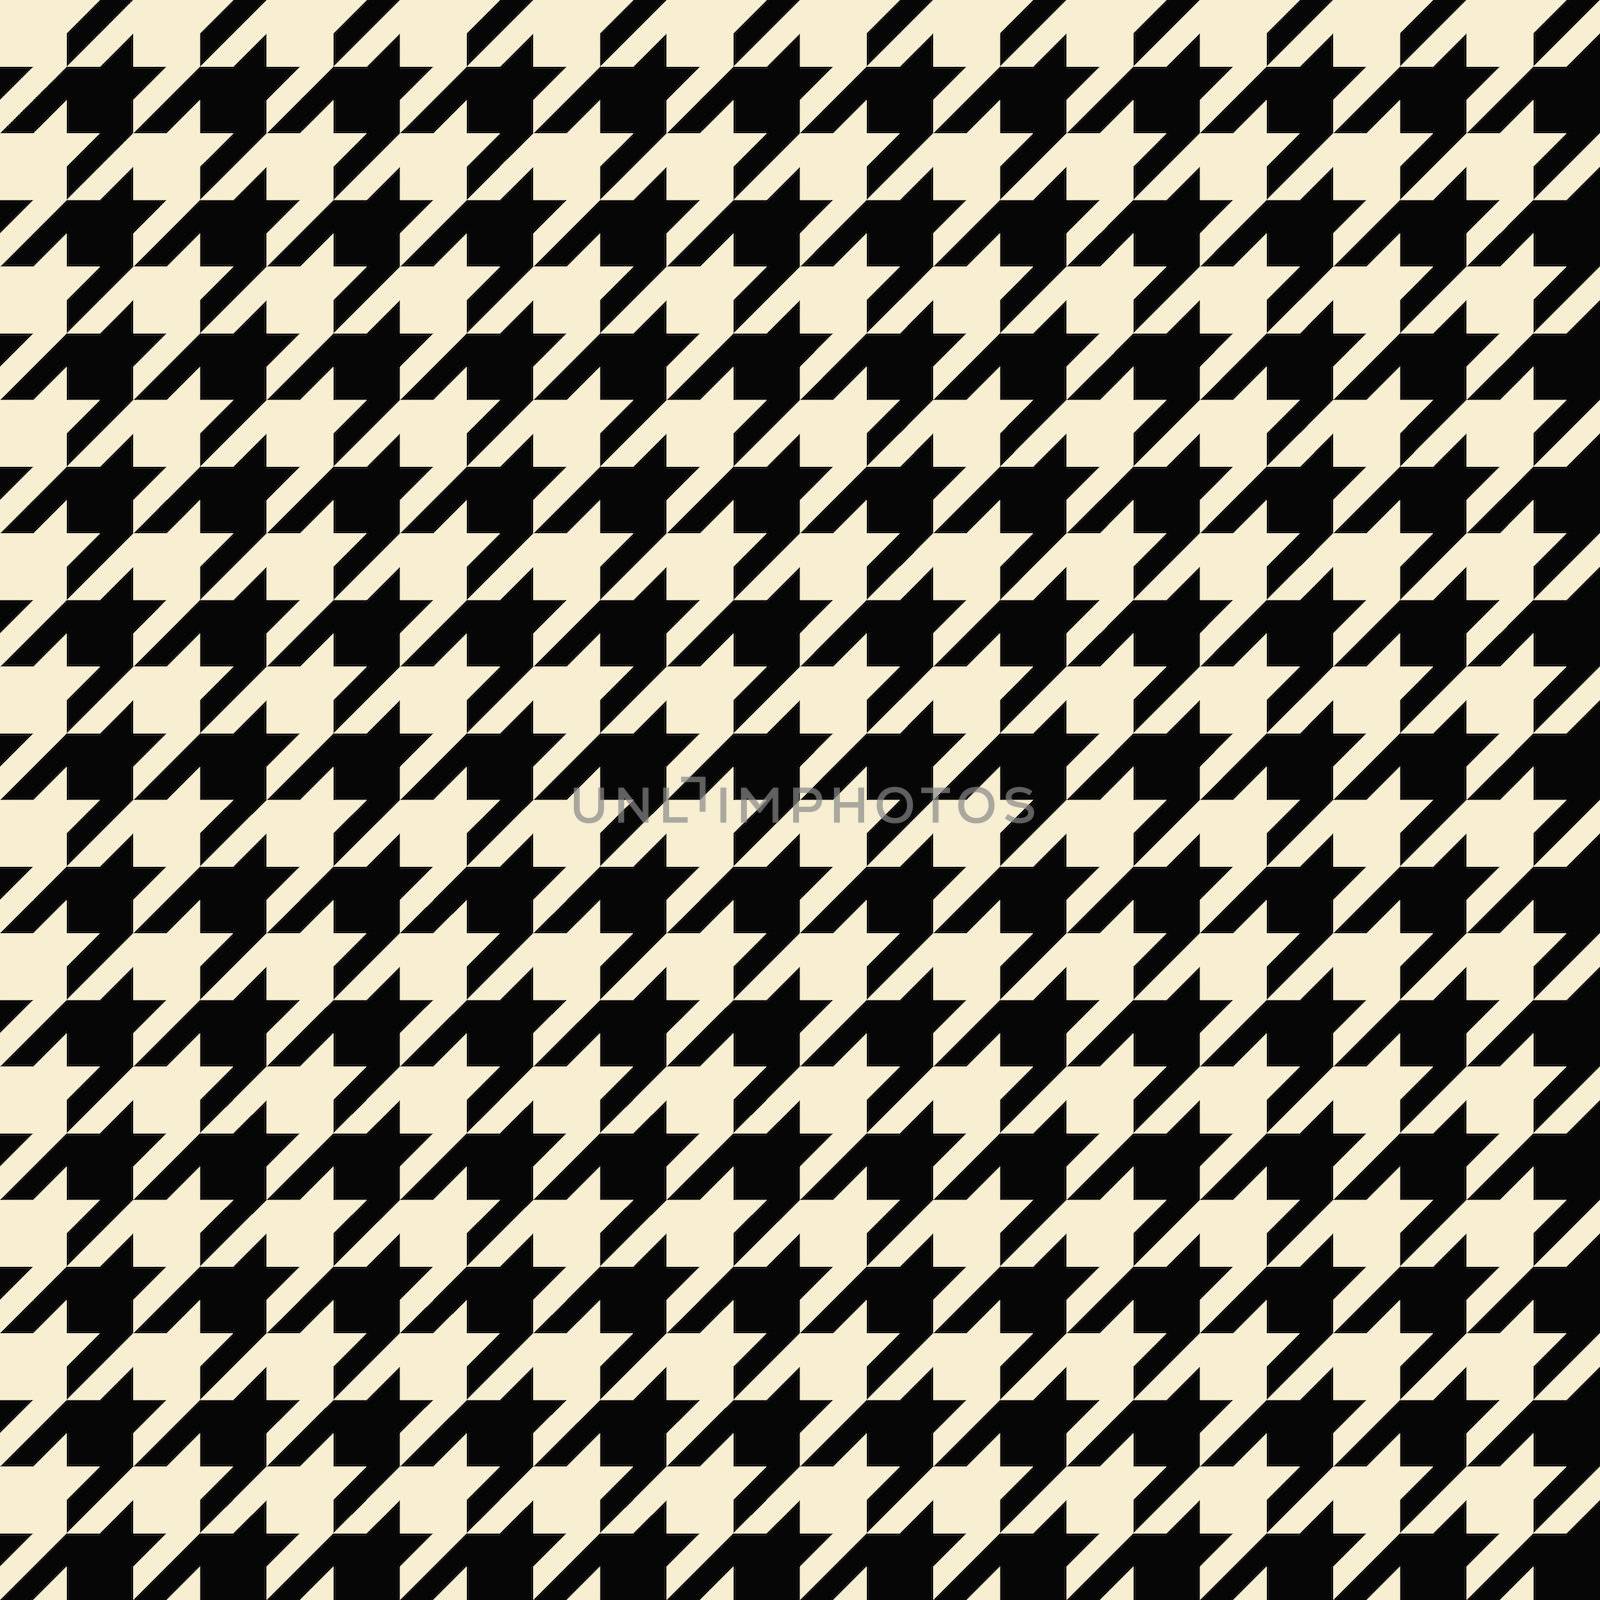 Tan Houndstooth Pattern by graficallyminded